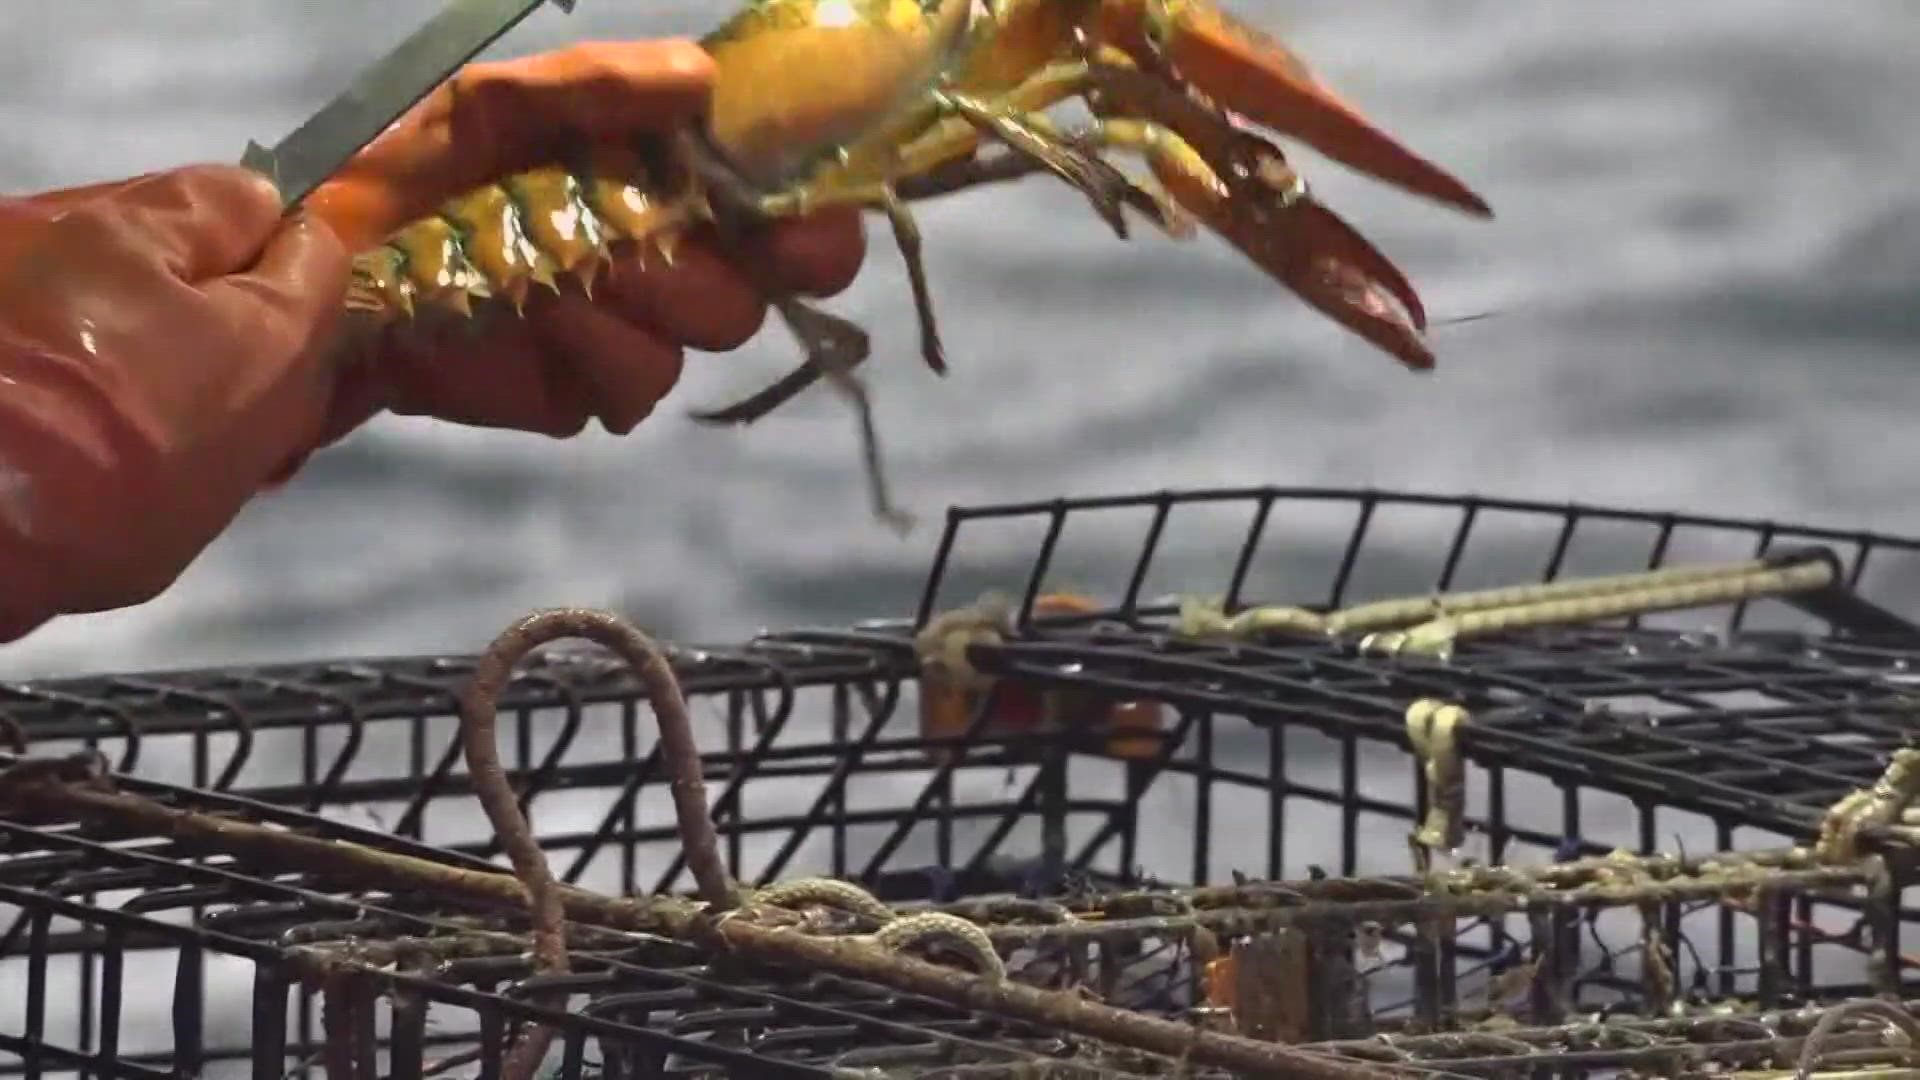 The Massachusetts Lobstermen's Association said the closure of 200 square miles of Massachusetts Bay, which started Feb. 1, is illegal and will cause economic harm.